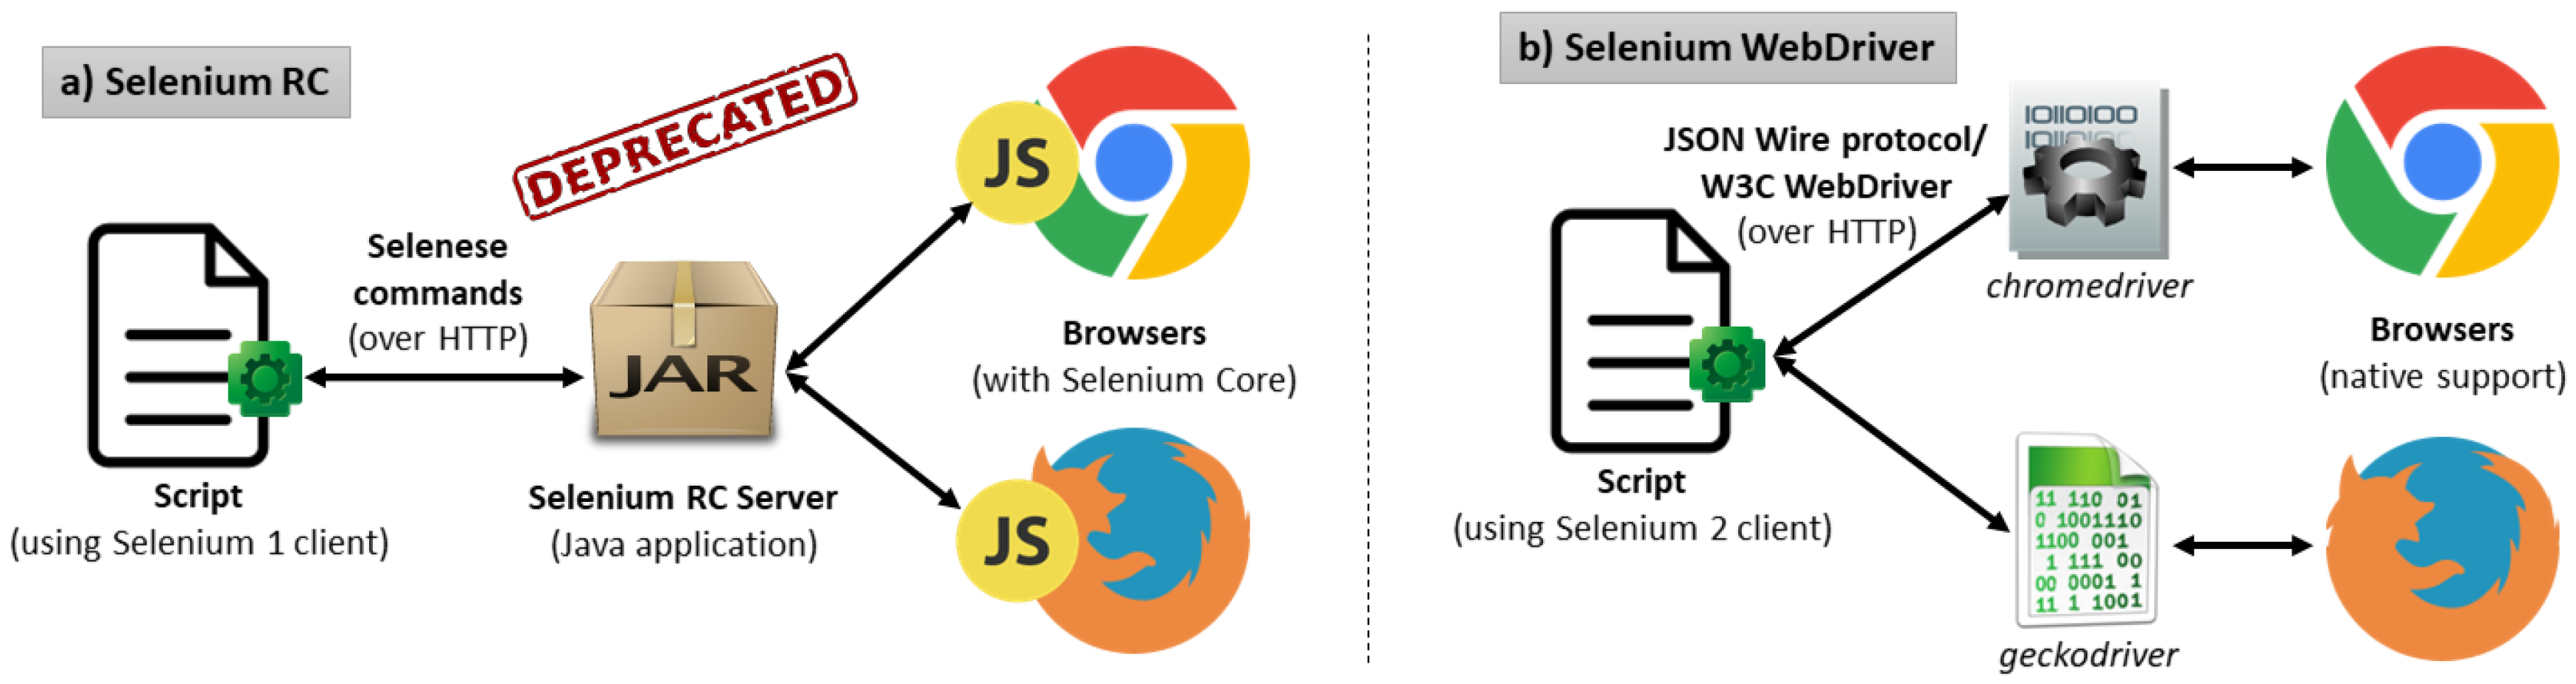 Puppeteer vs Selenium  Which One Should You Choose?